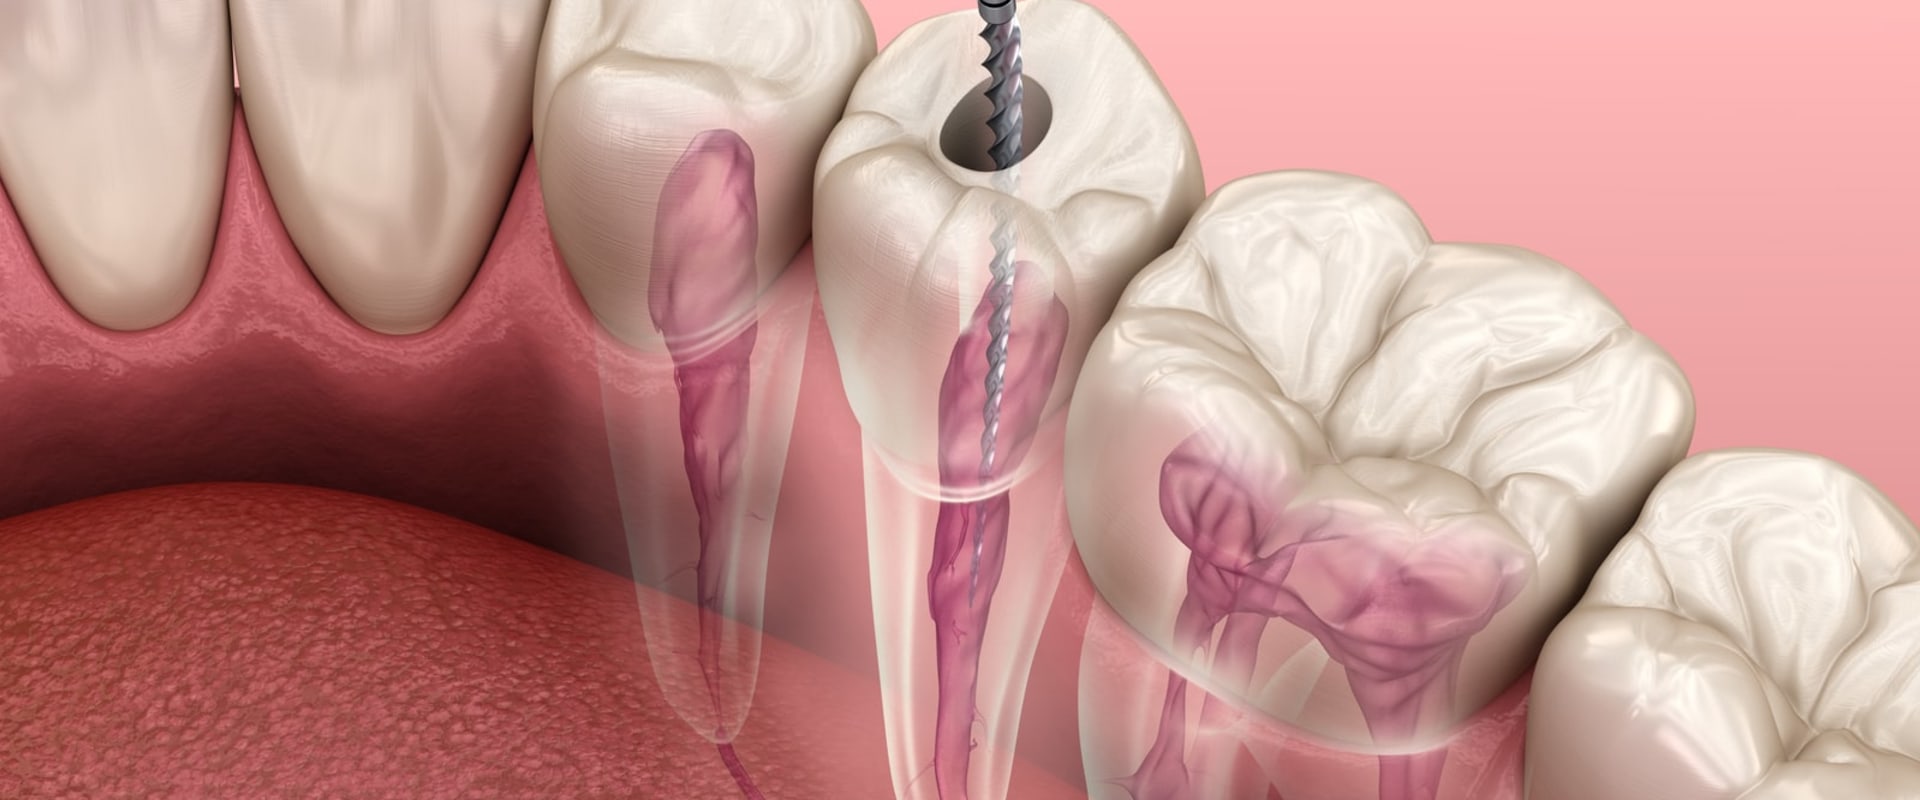 Are Endodontists the Best Choice for Root Canal Treatment?